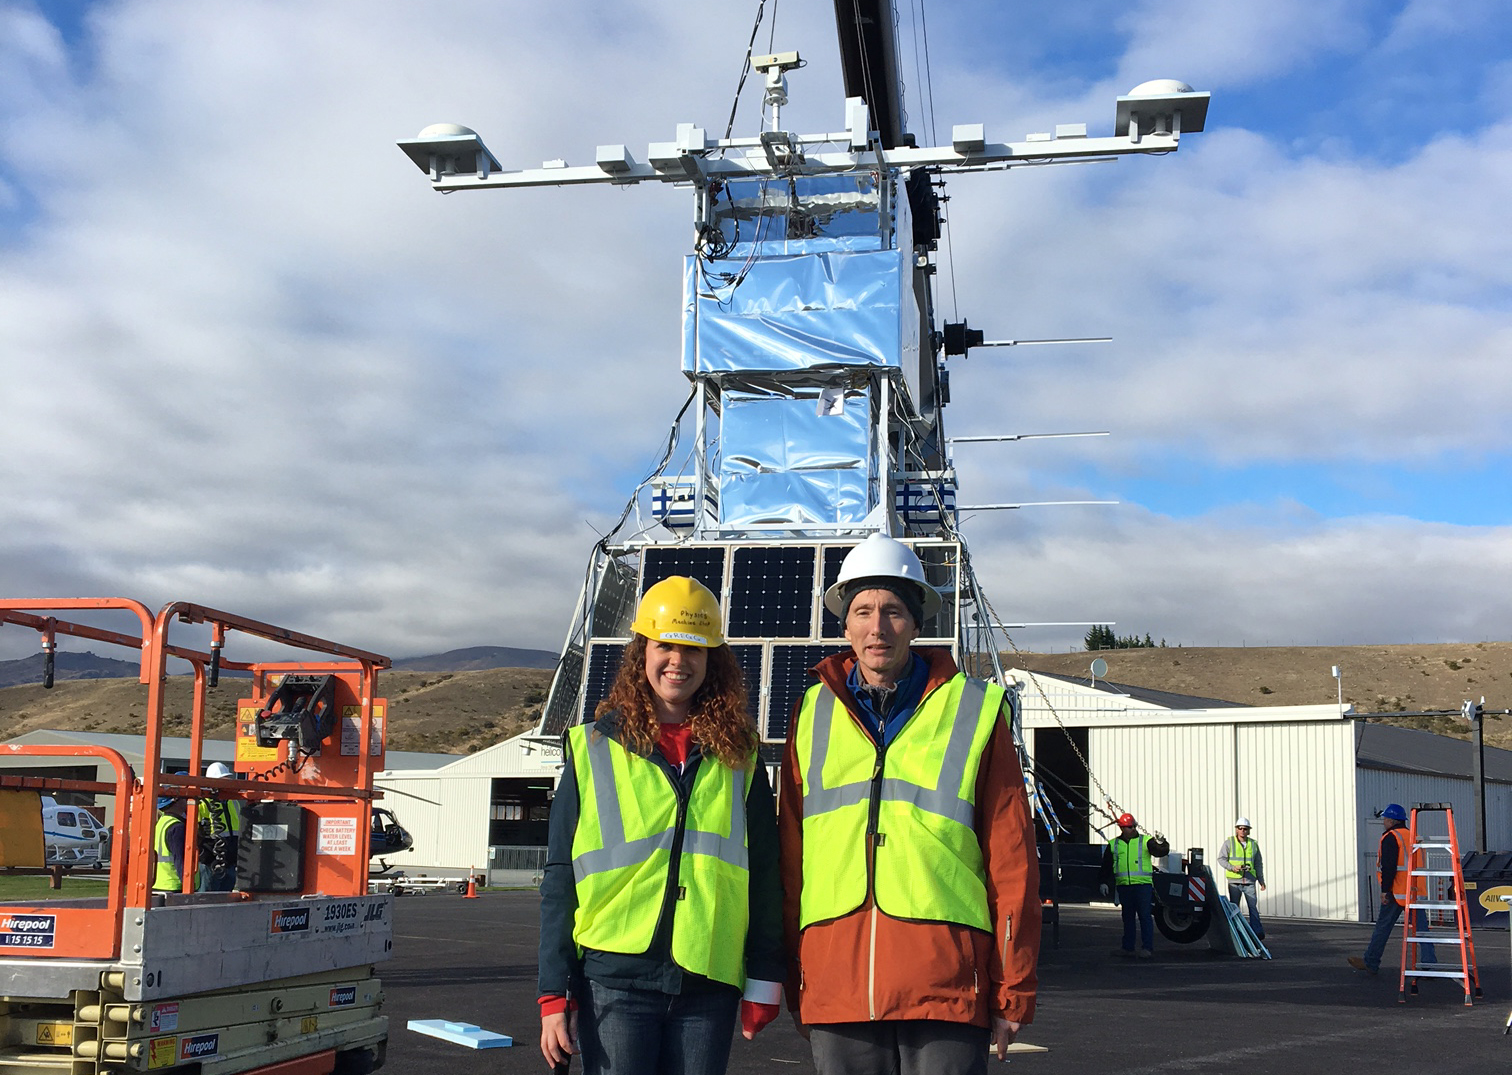 Rachel Gregg and Lawrence Wiencke at the launch site in New Zealand